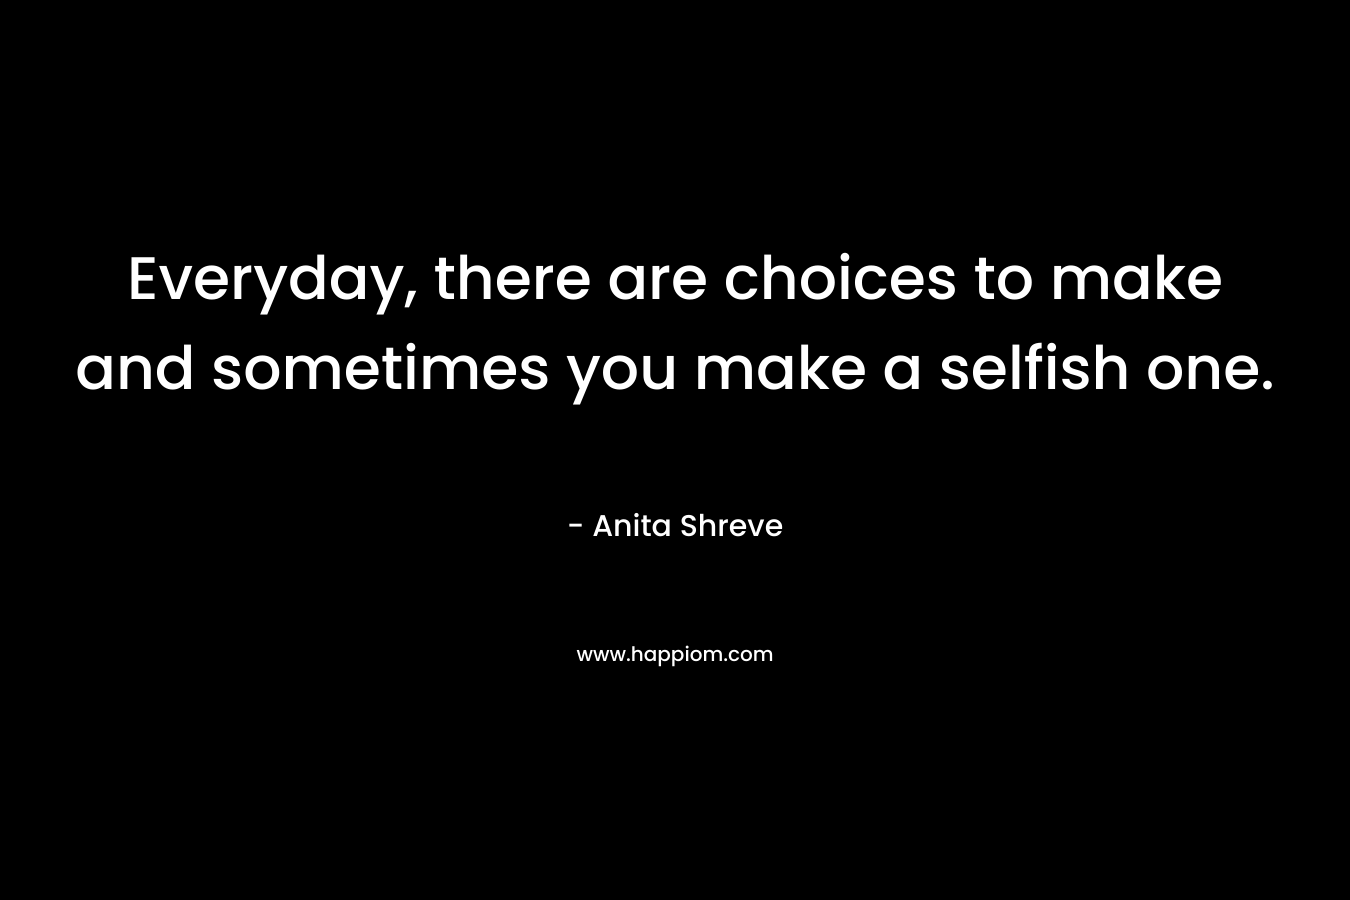 Everyday, there are choices to make and sometimes you make a selfish one.